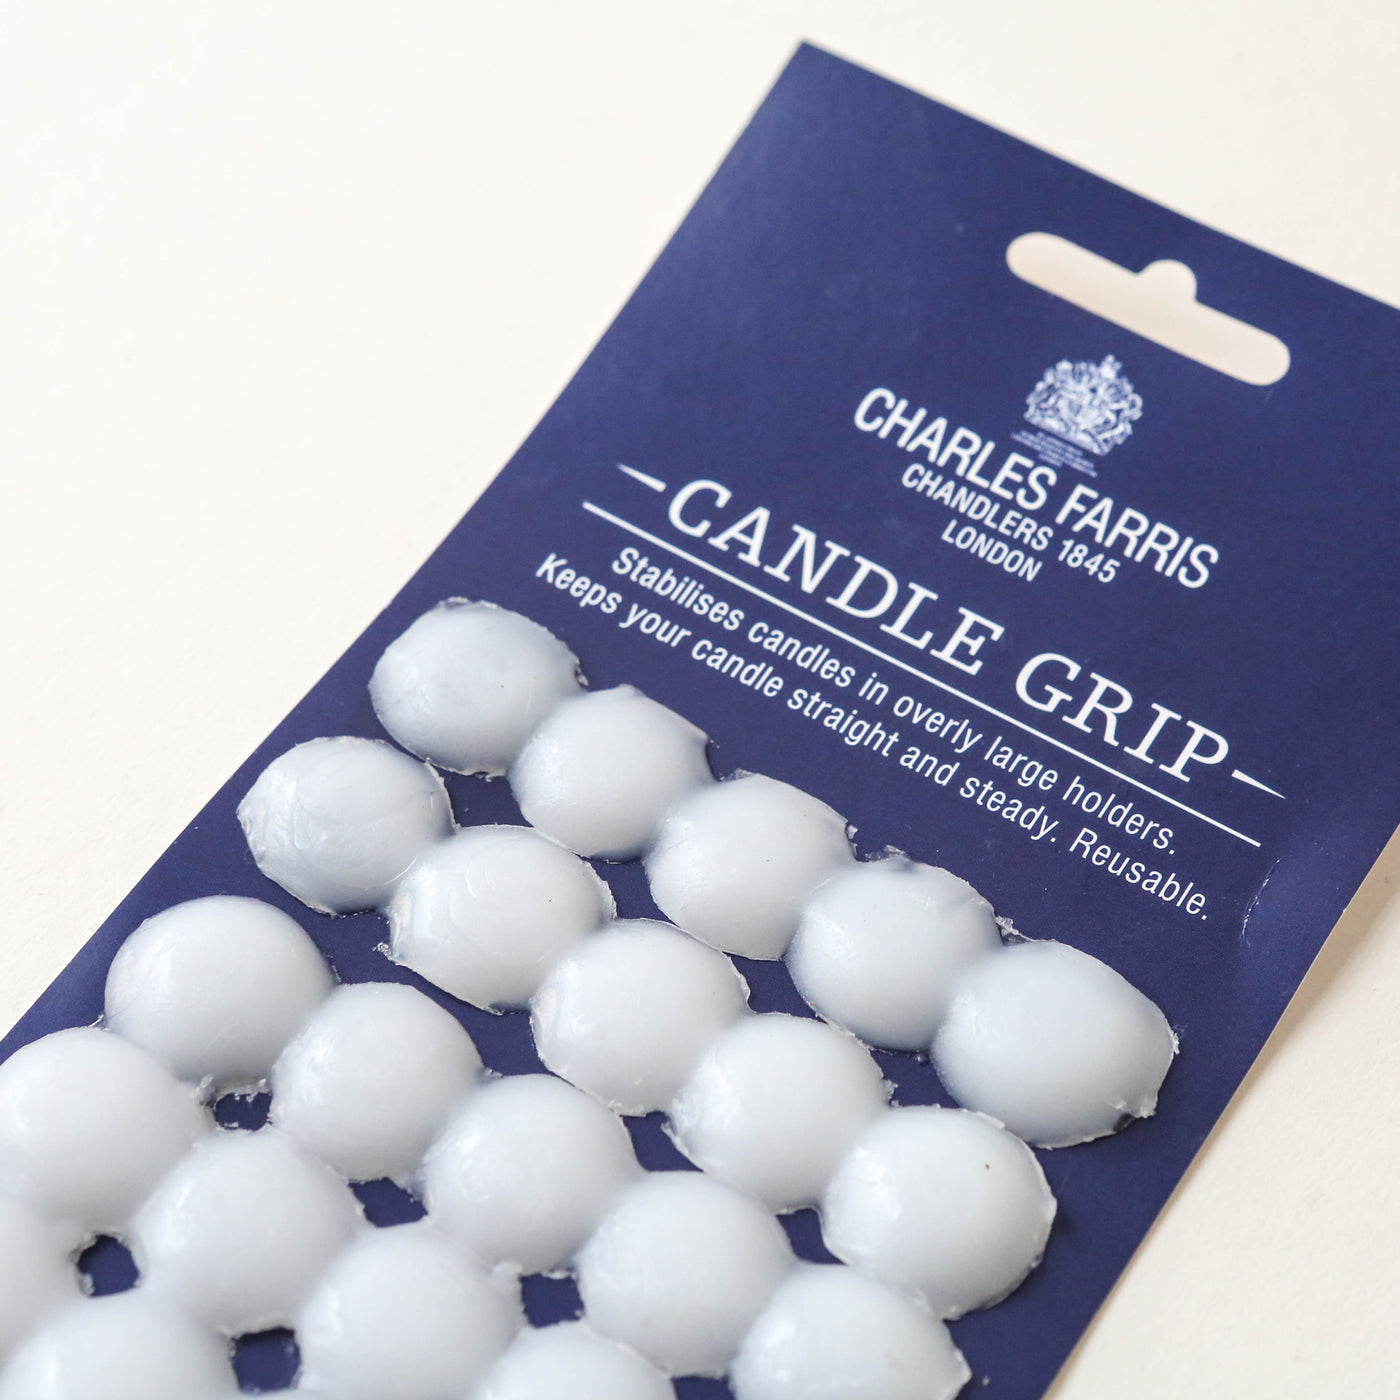 Pack of 25 Wax Candle Grip Tabs